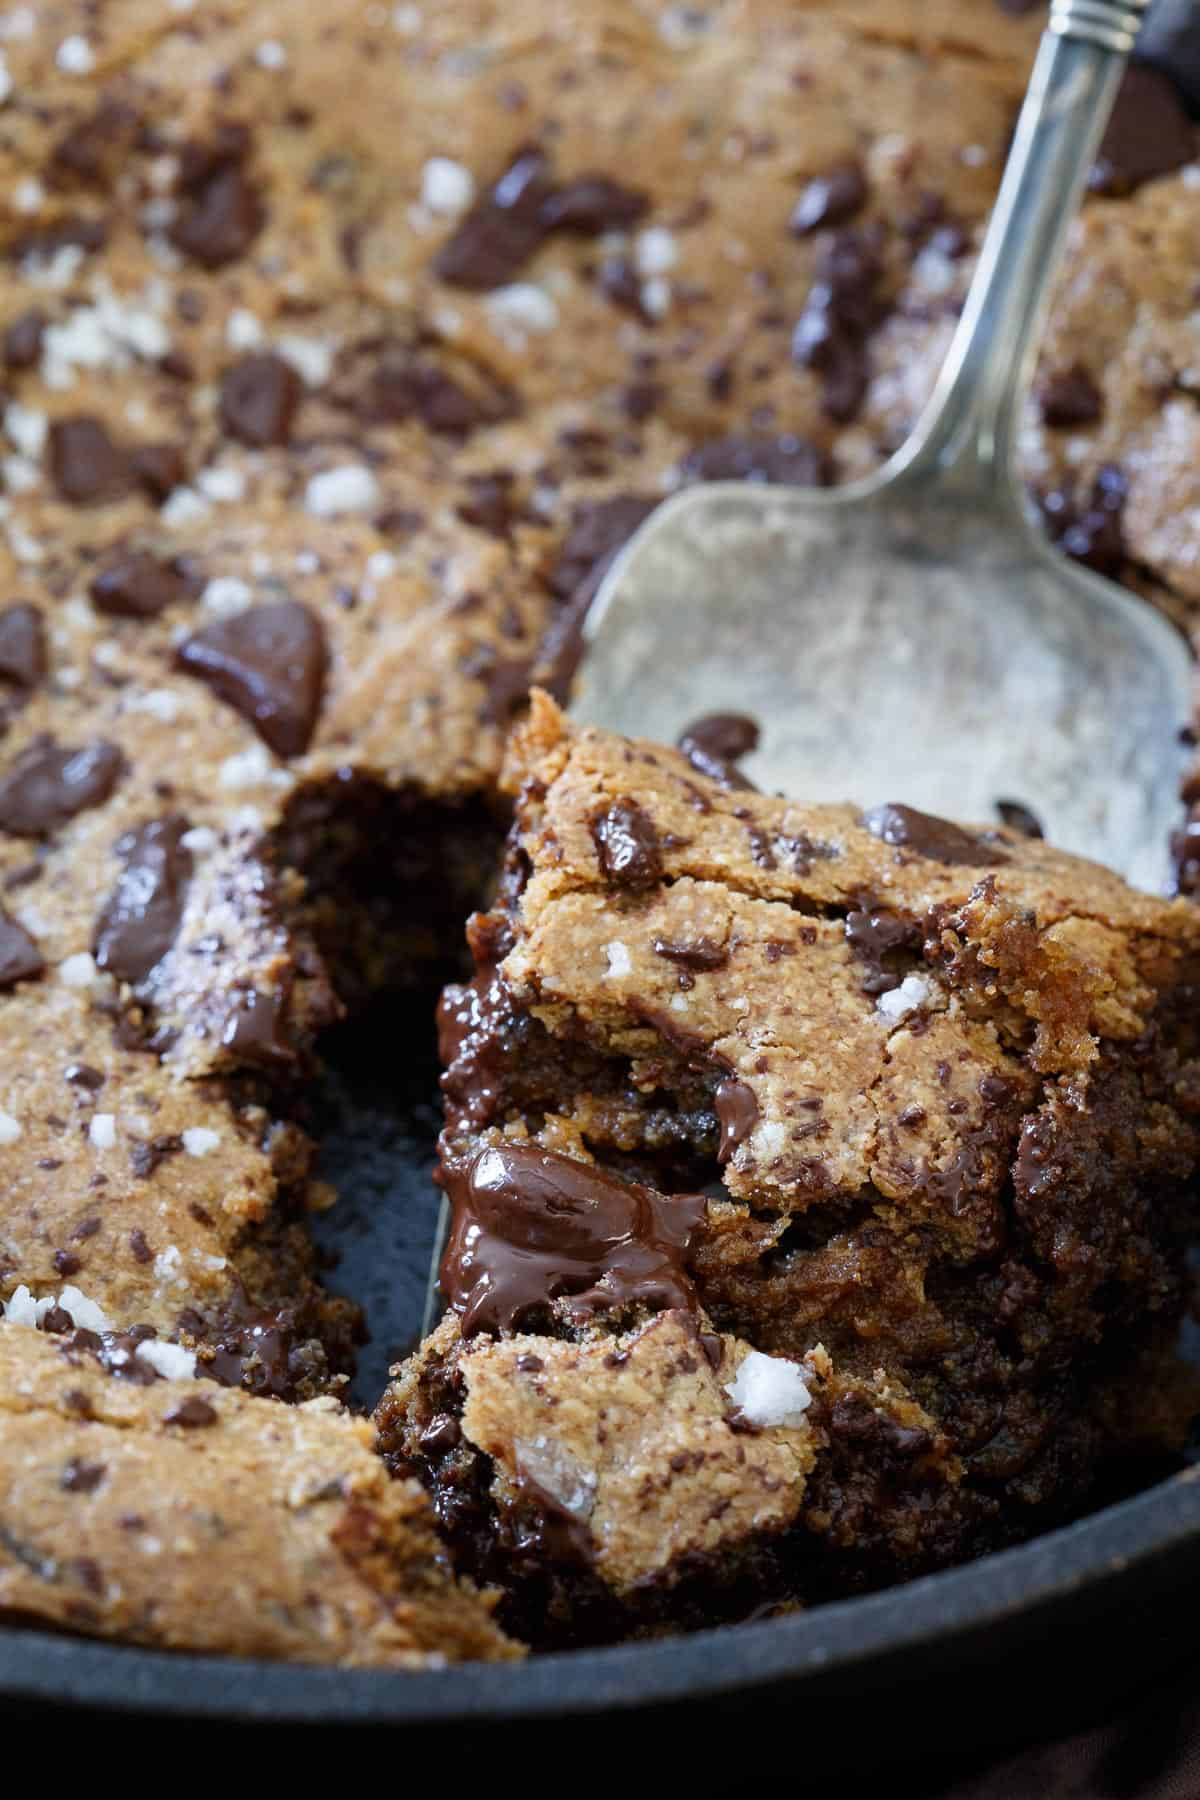 This Paleo salted chocolate chip cookie skillet is decadent, gooey, chocolatey and the perfect grain free dessert.